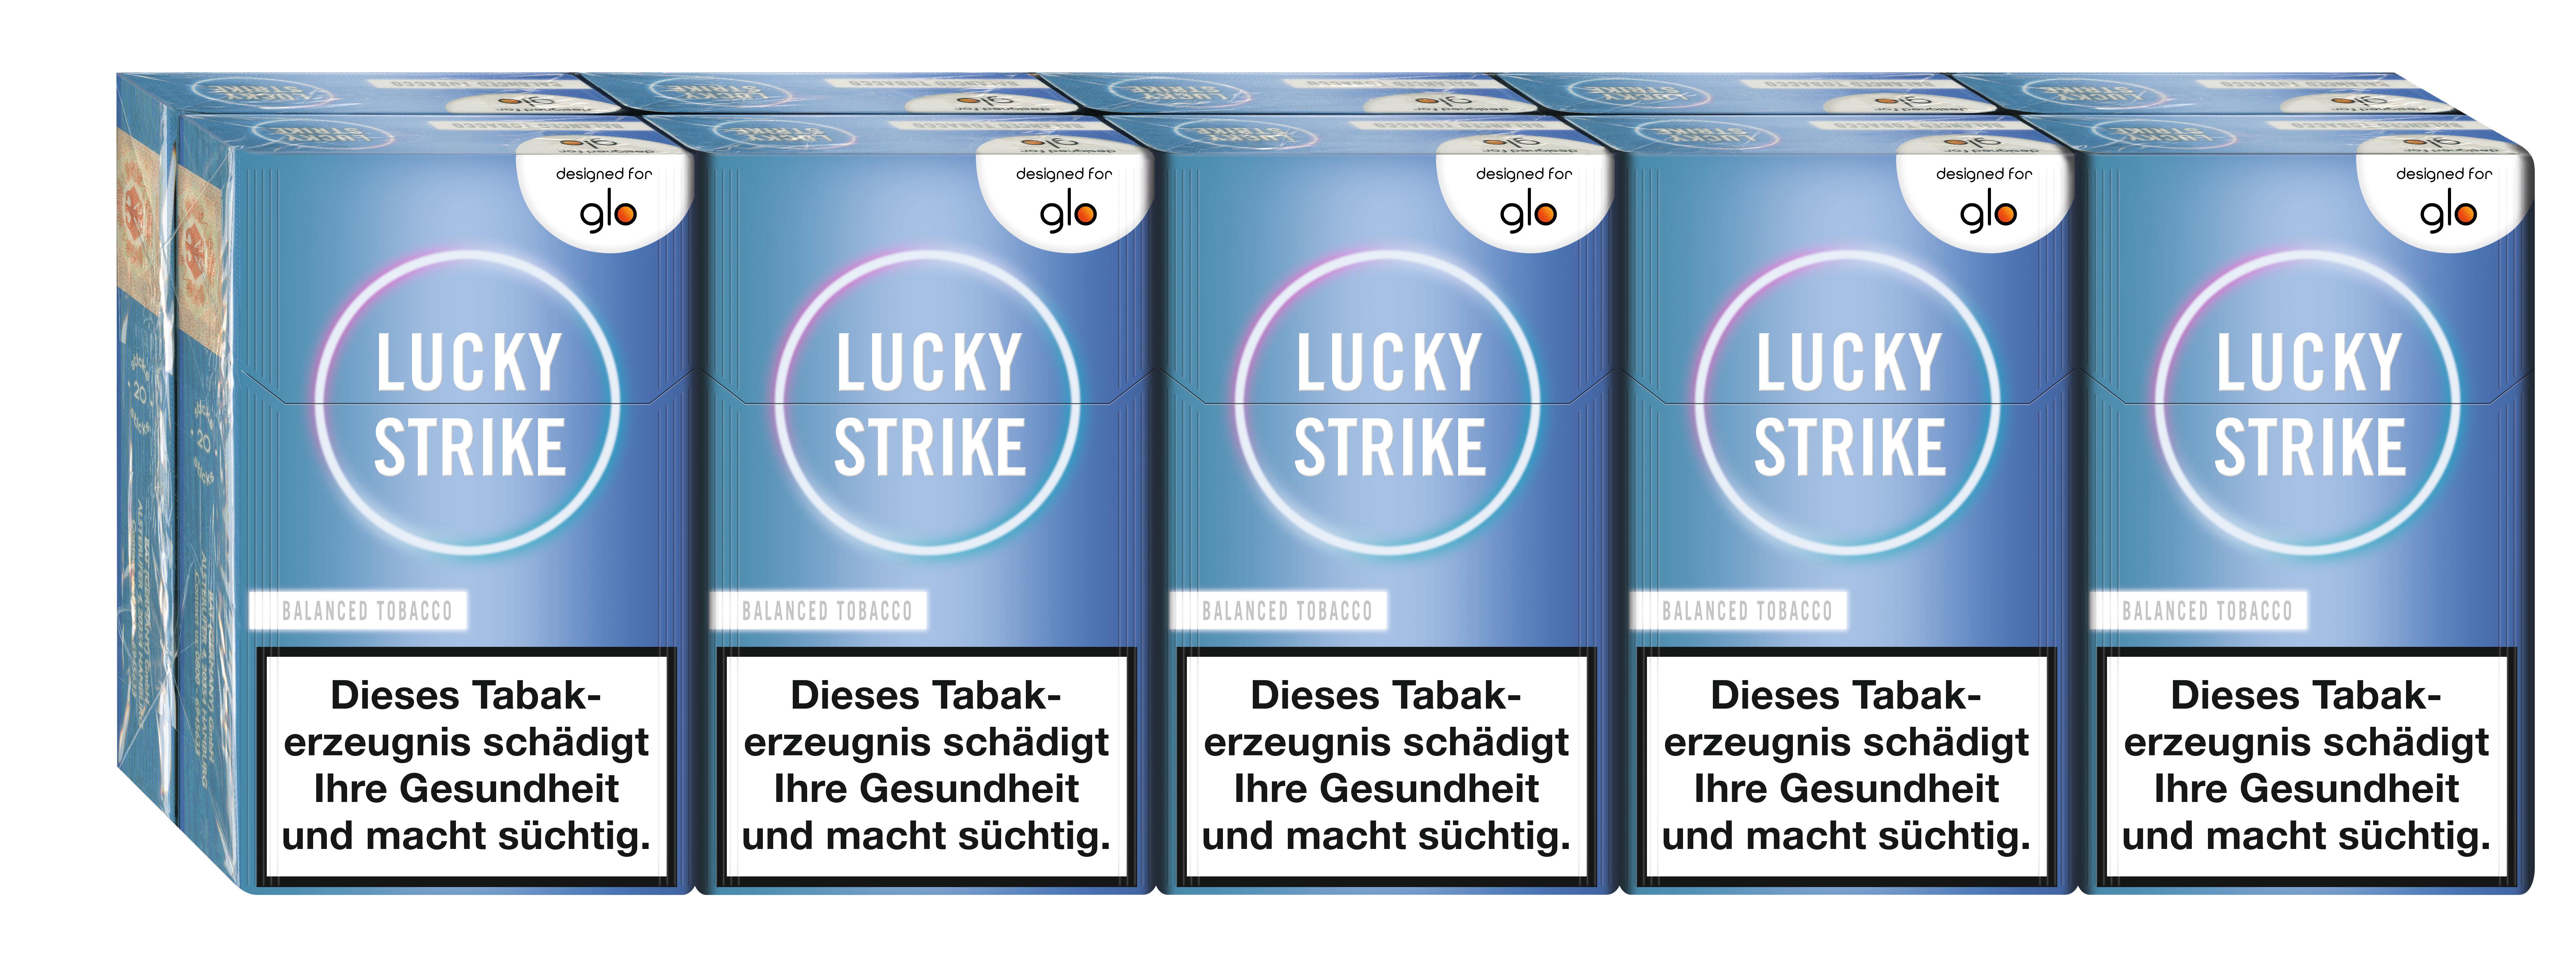 Lucky Strike for glo Balanced Tobacco 1 Stange